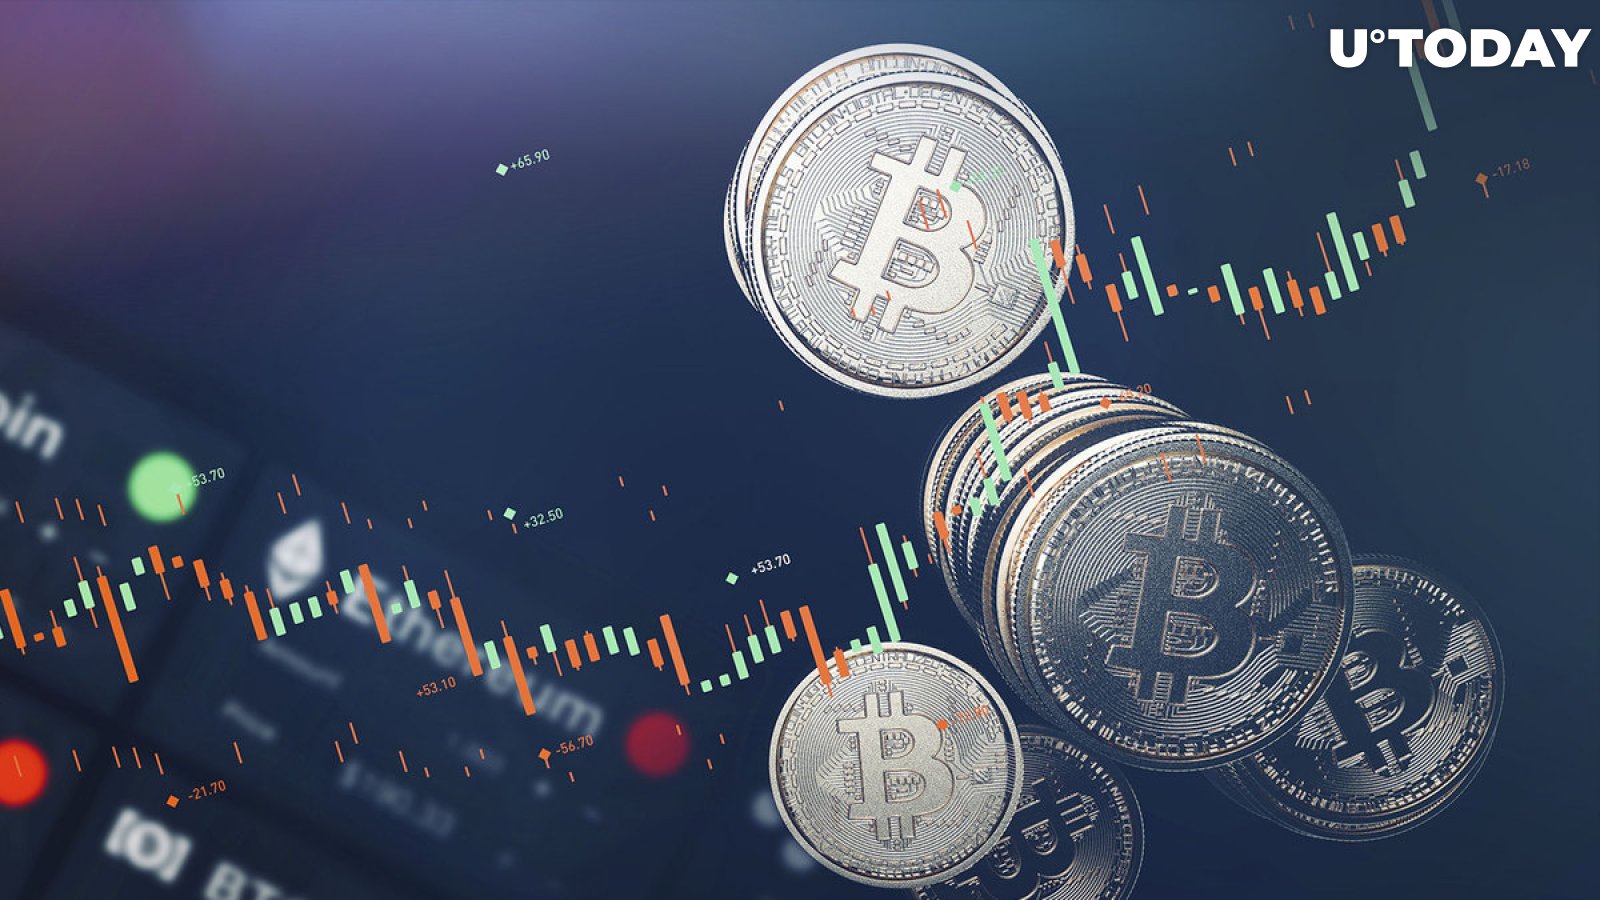 Bitcoin Likely Targeting $13,900 - $11,400, Senior Market Analyst Believes